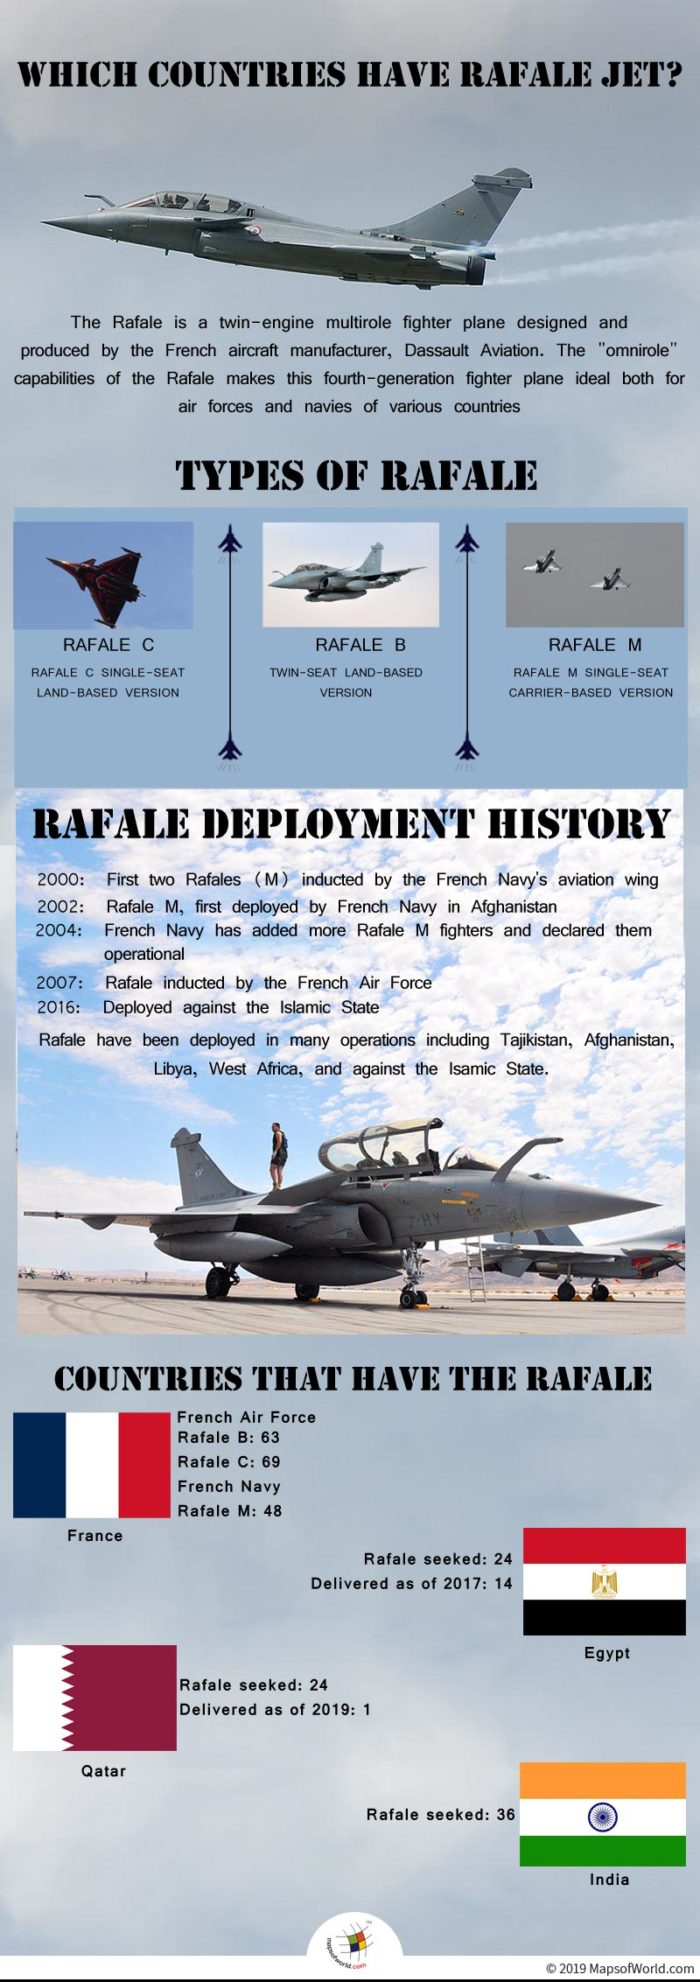 Infographic Giving Details on Rafale Jet